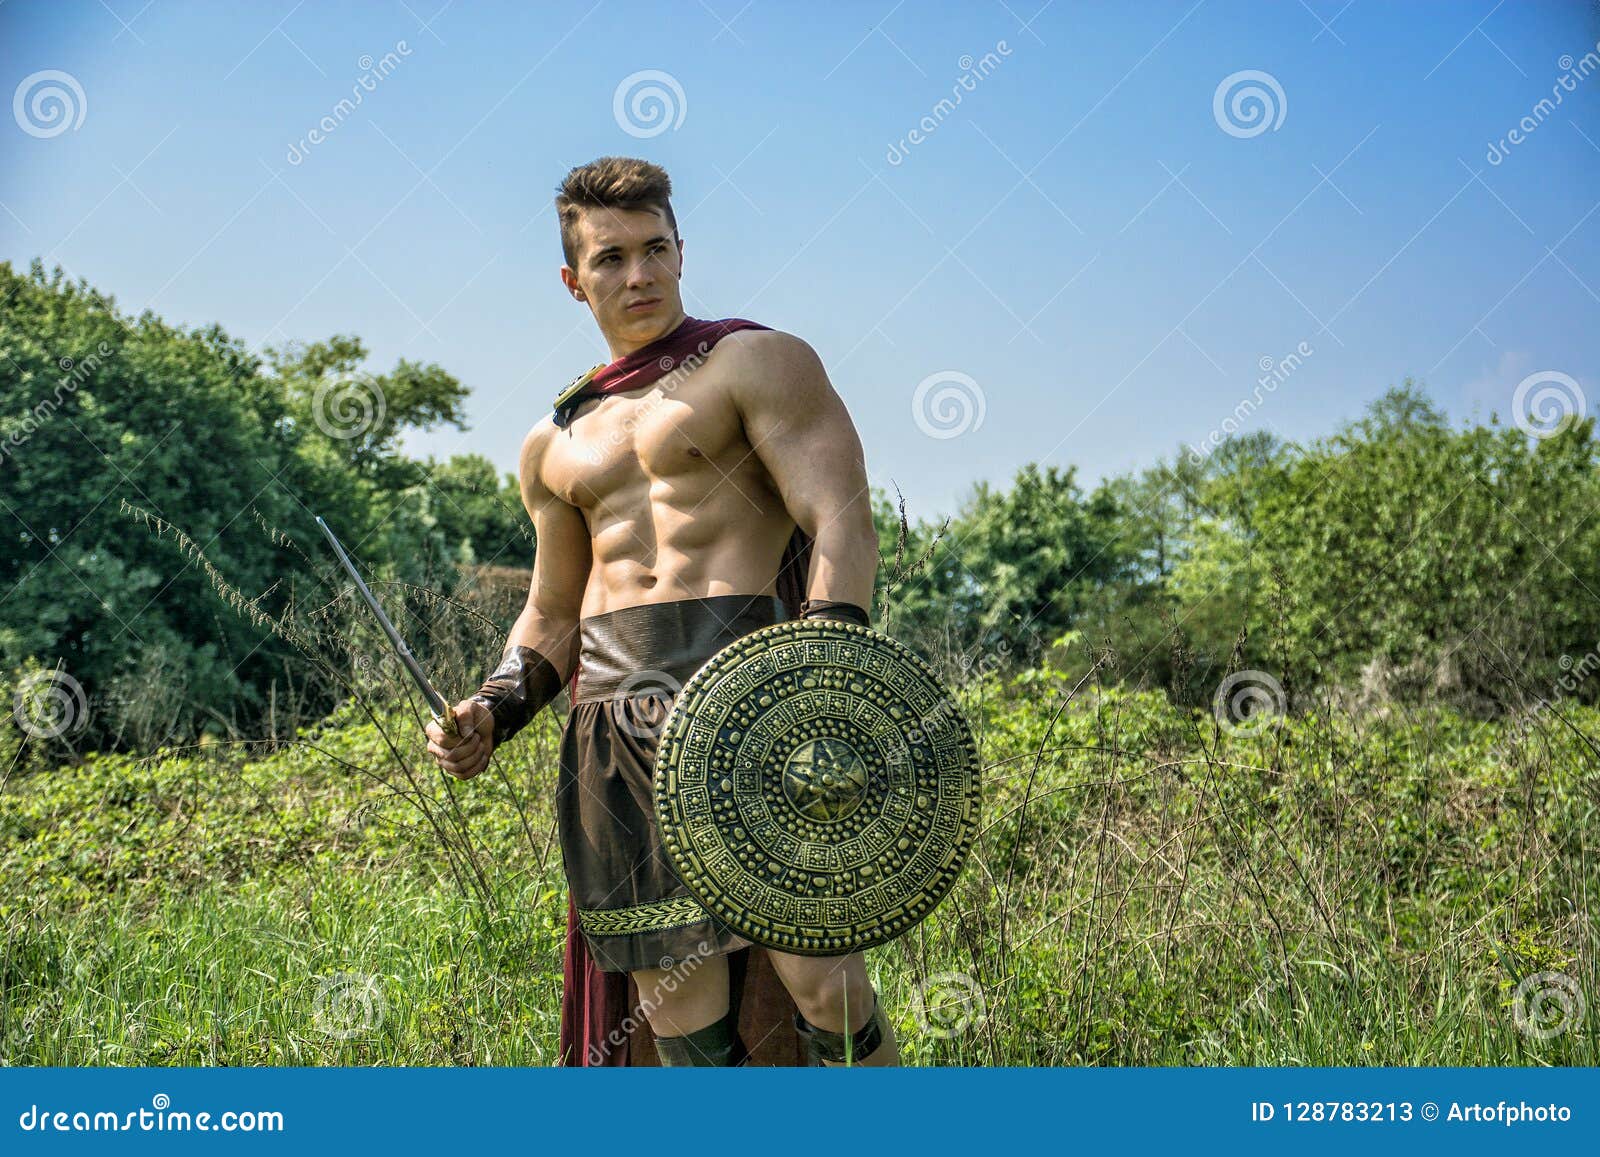 young muscular man posing in gladiator costume